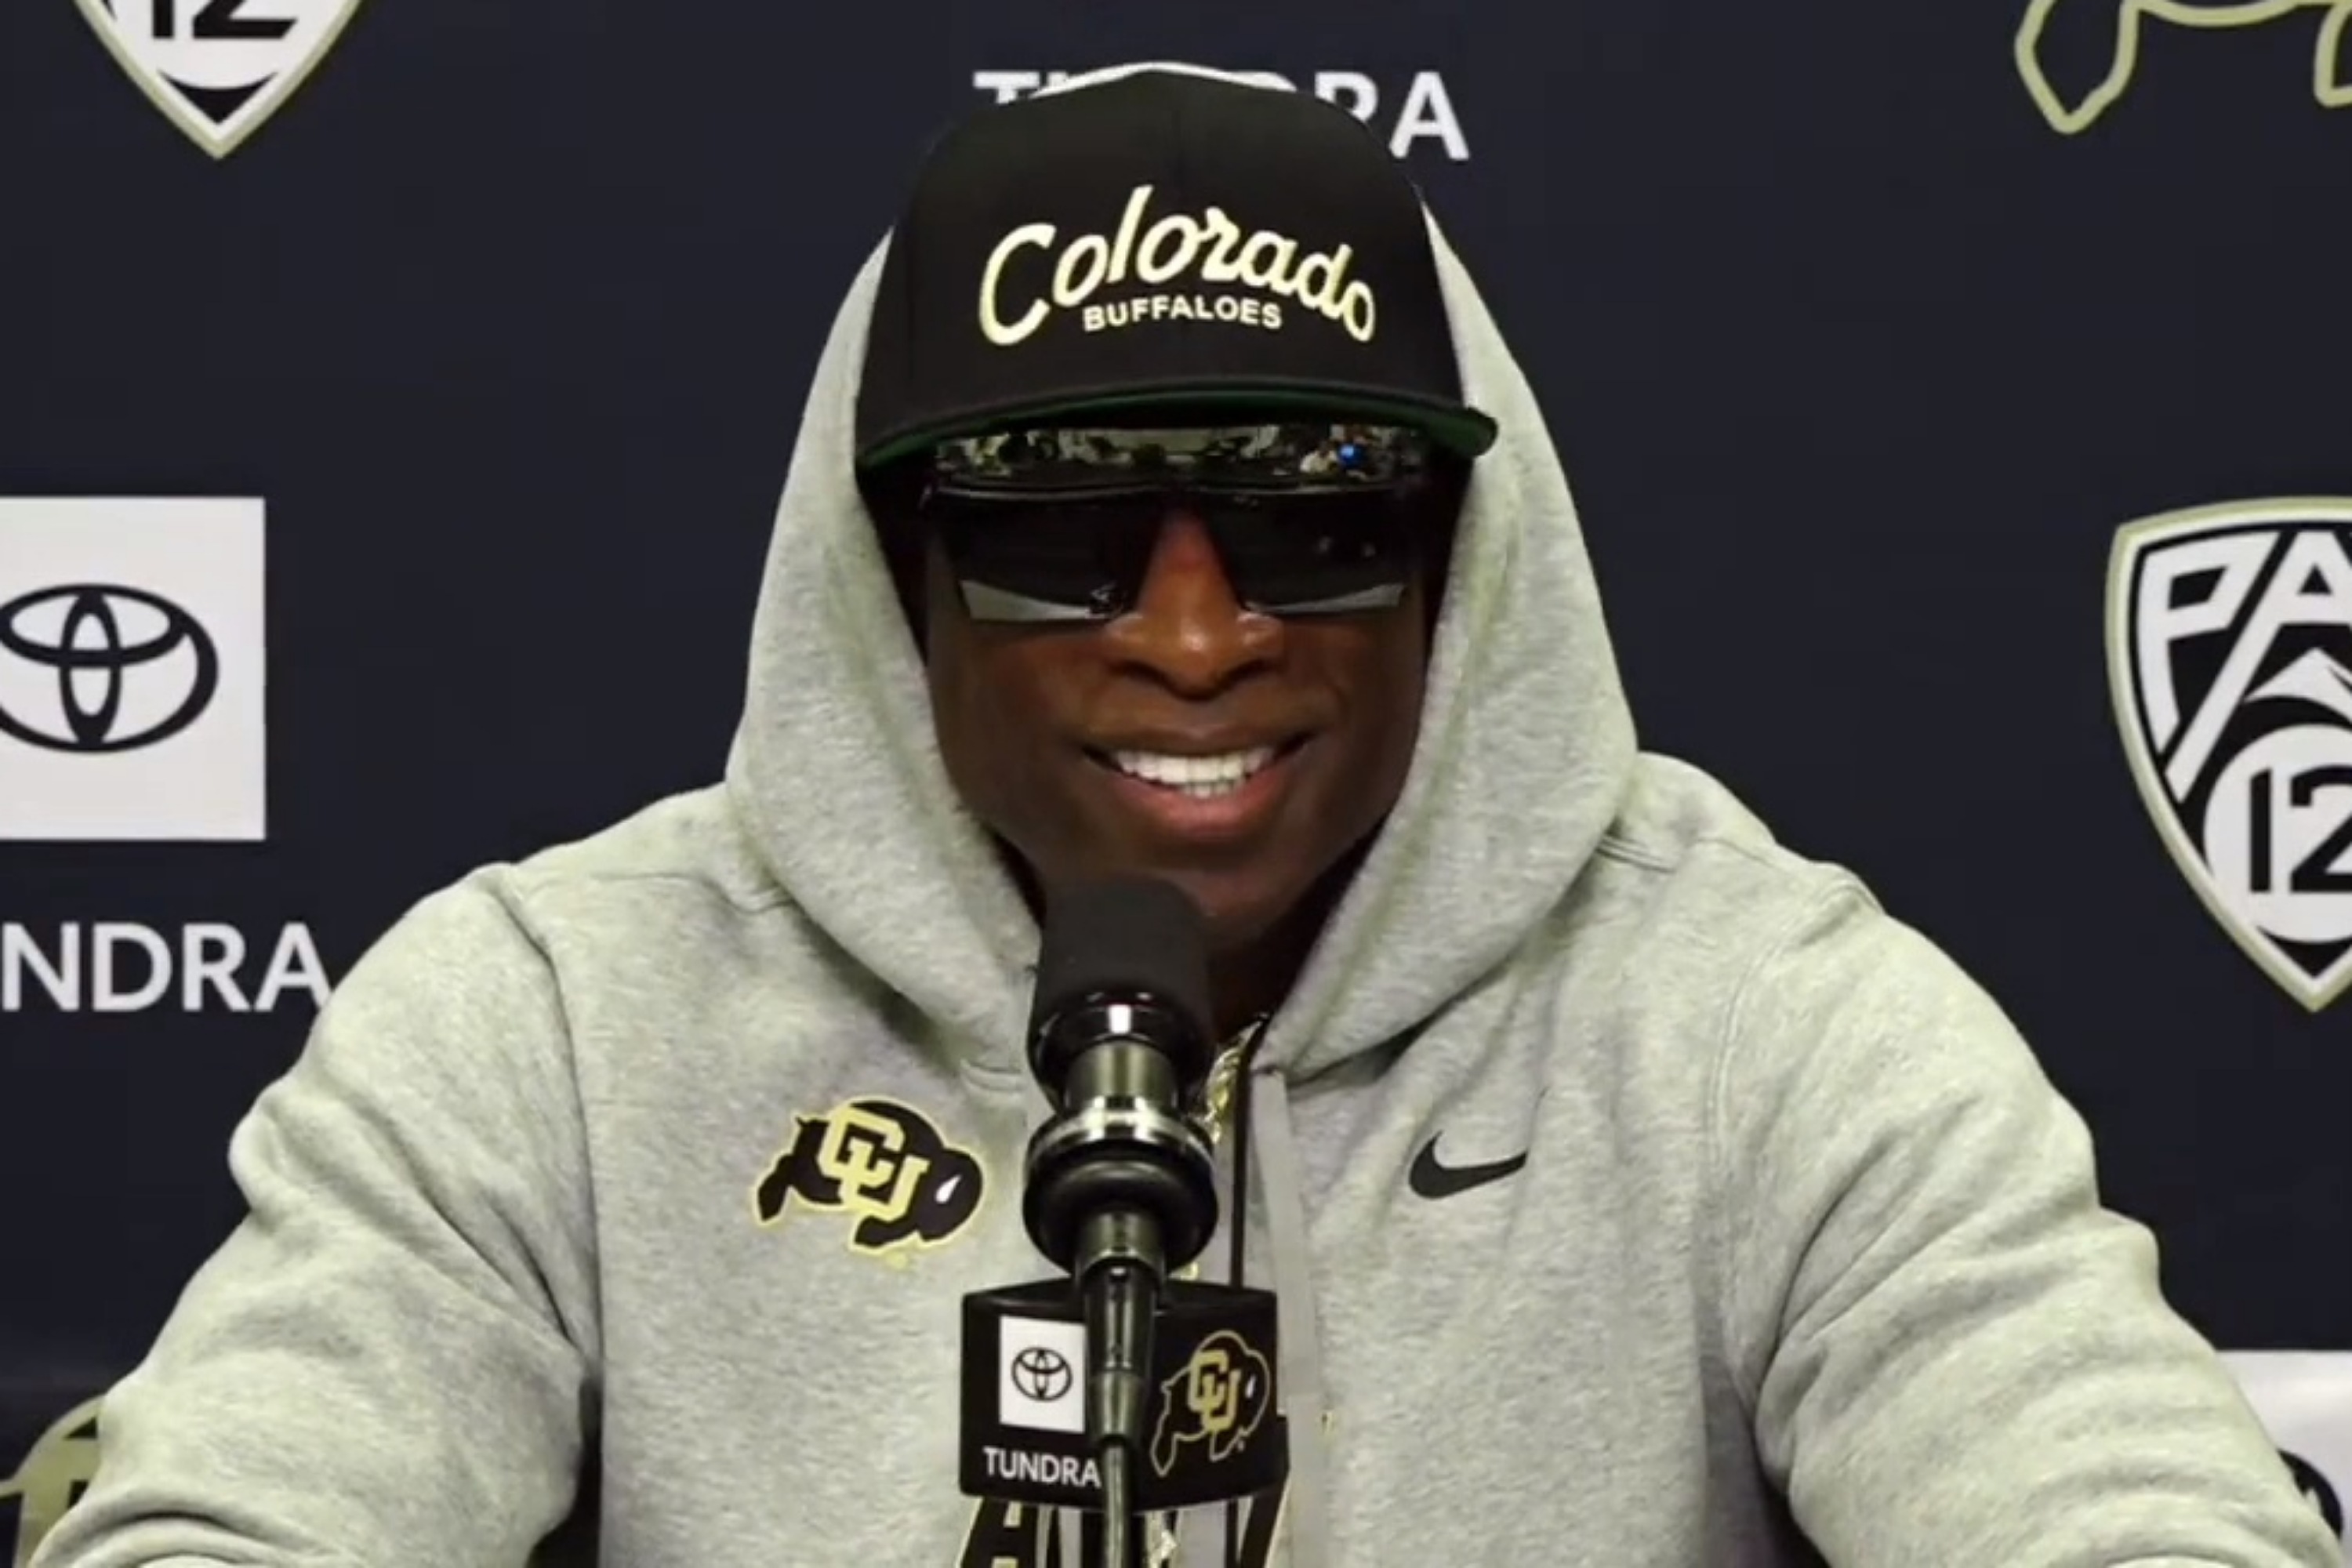 Deion Sanders at weekly press conference talking about ASU